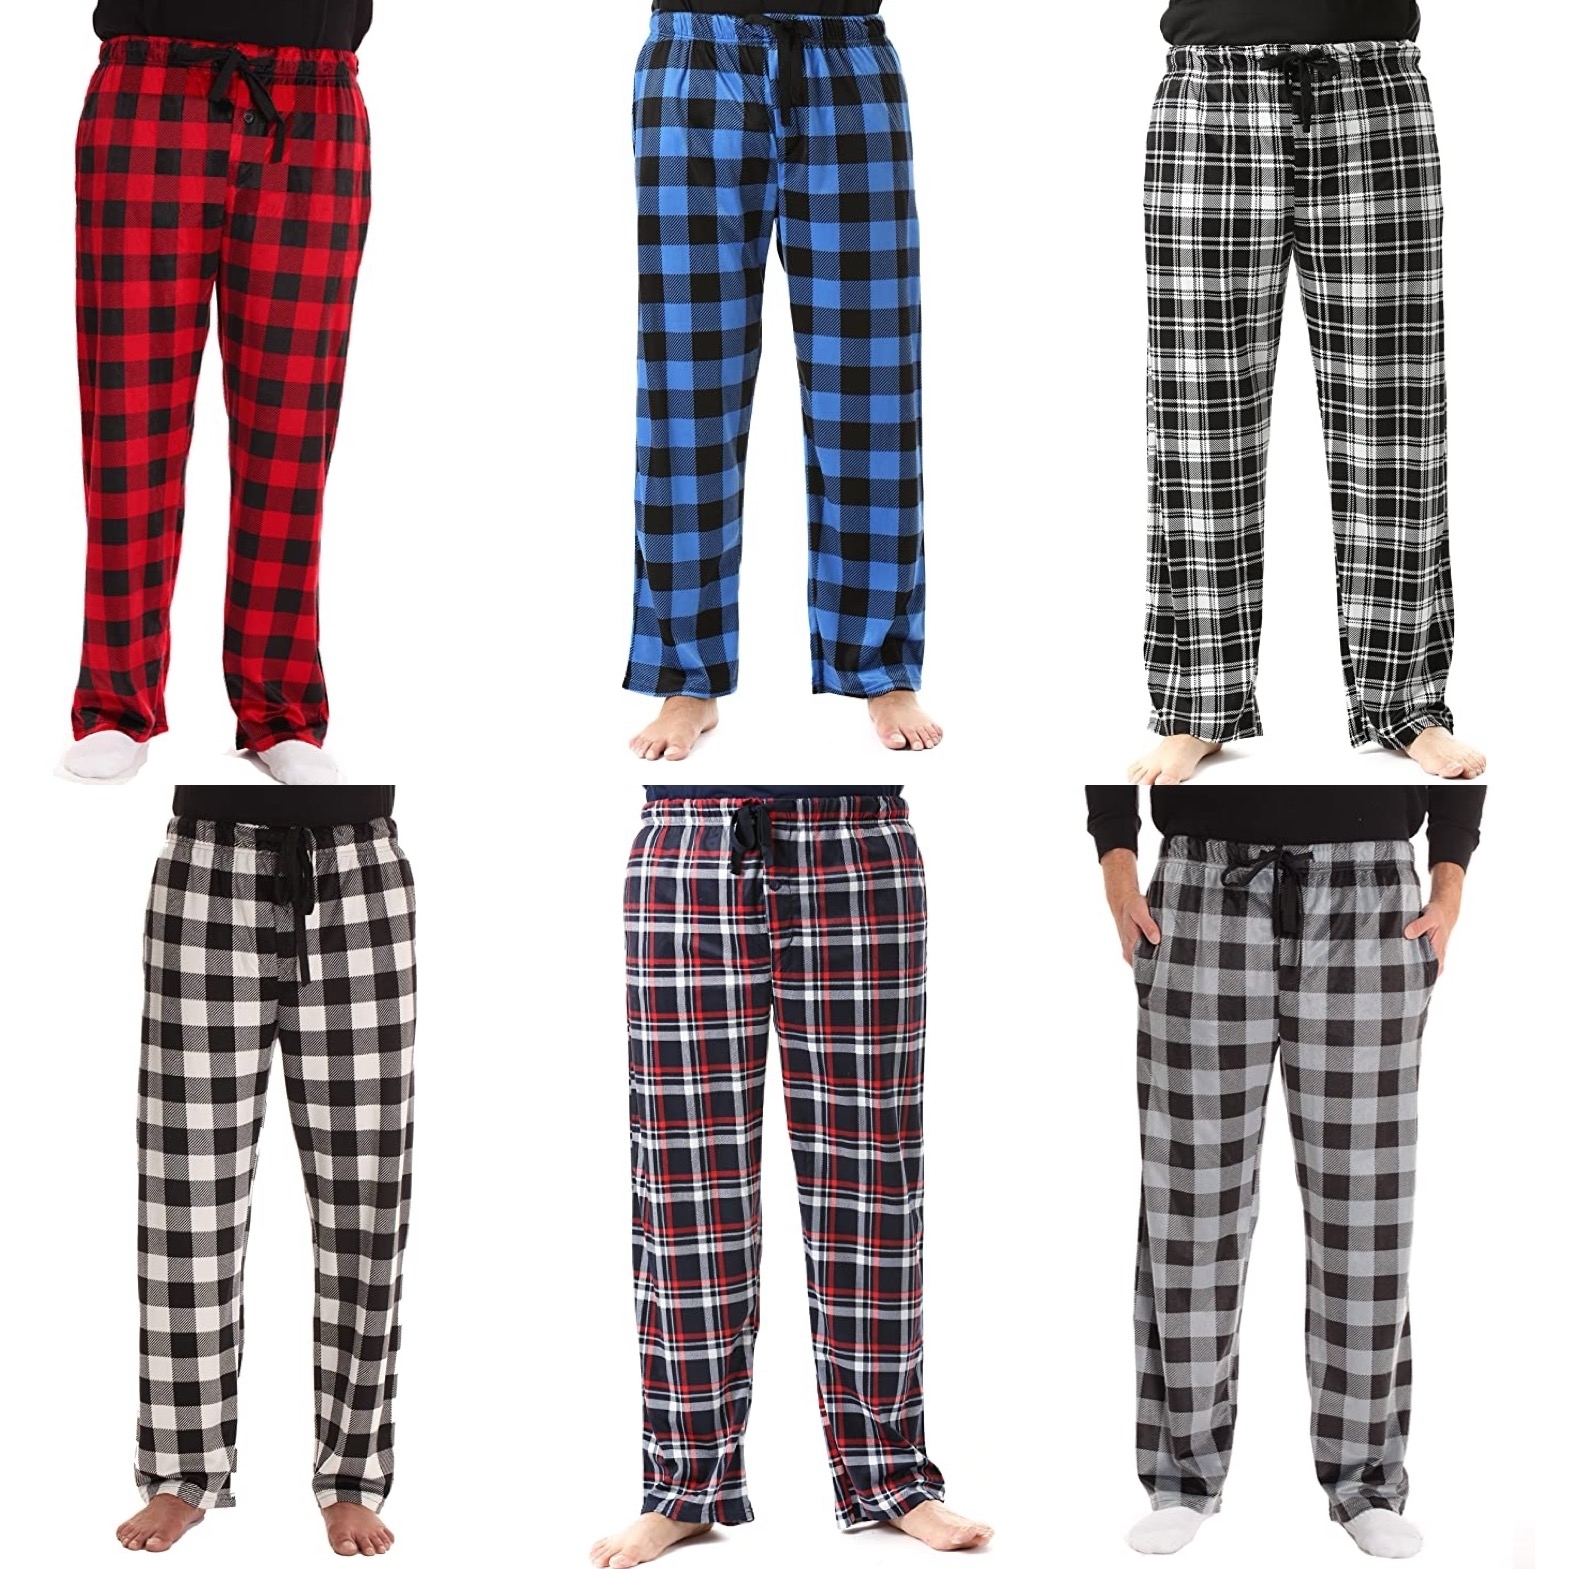 Multi-Pack: Men's Ultra Soft Flannel Plaid Pajama Lounge Pants - 1-Pack, Small